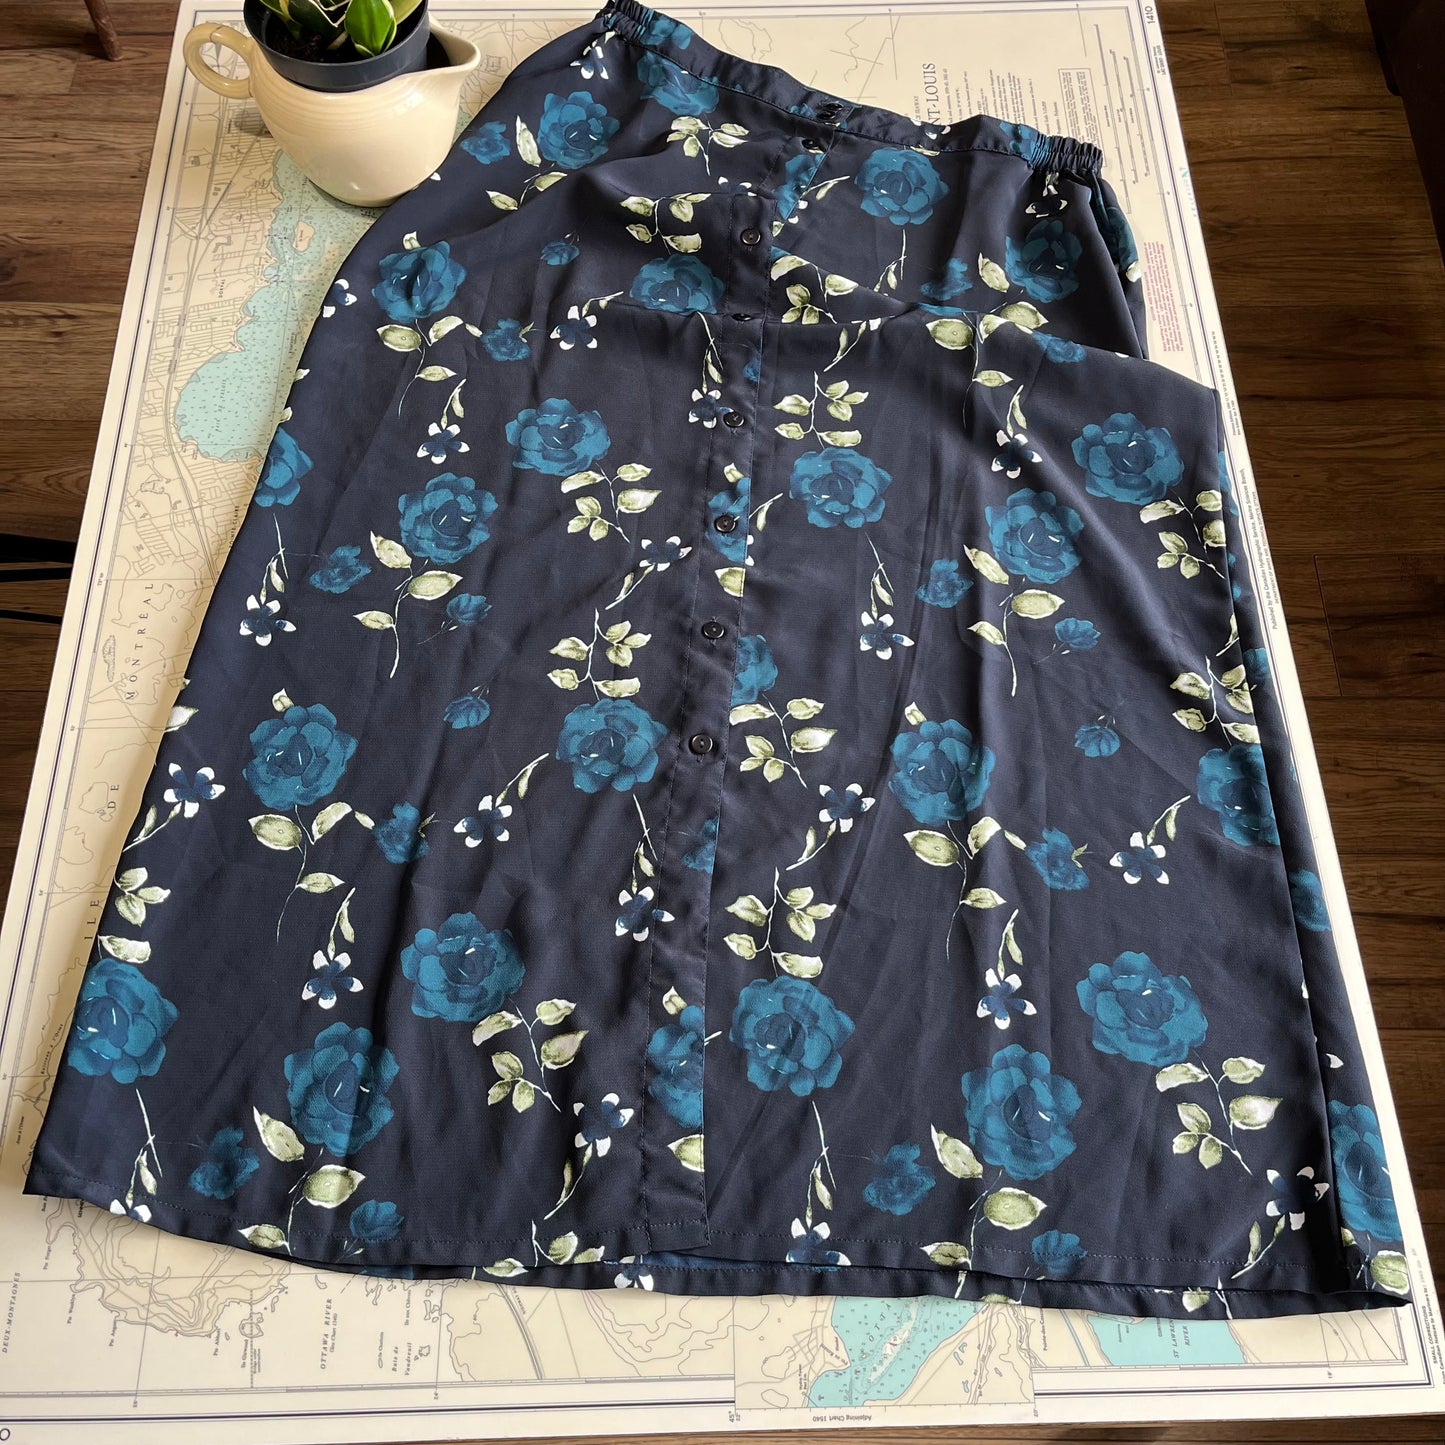 Vintage 90s Dark Floral Navy and Teal Button Front Skirt